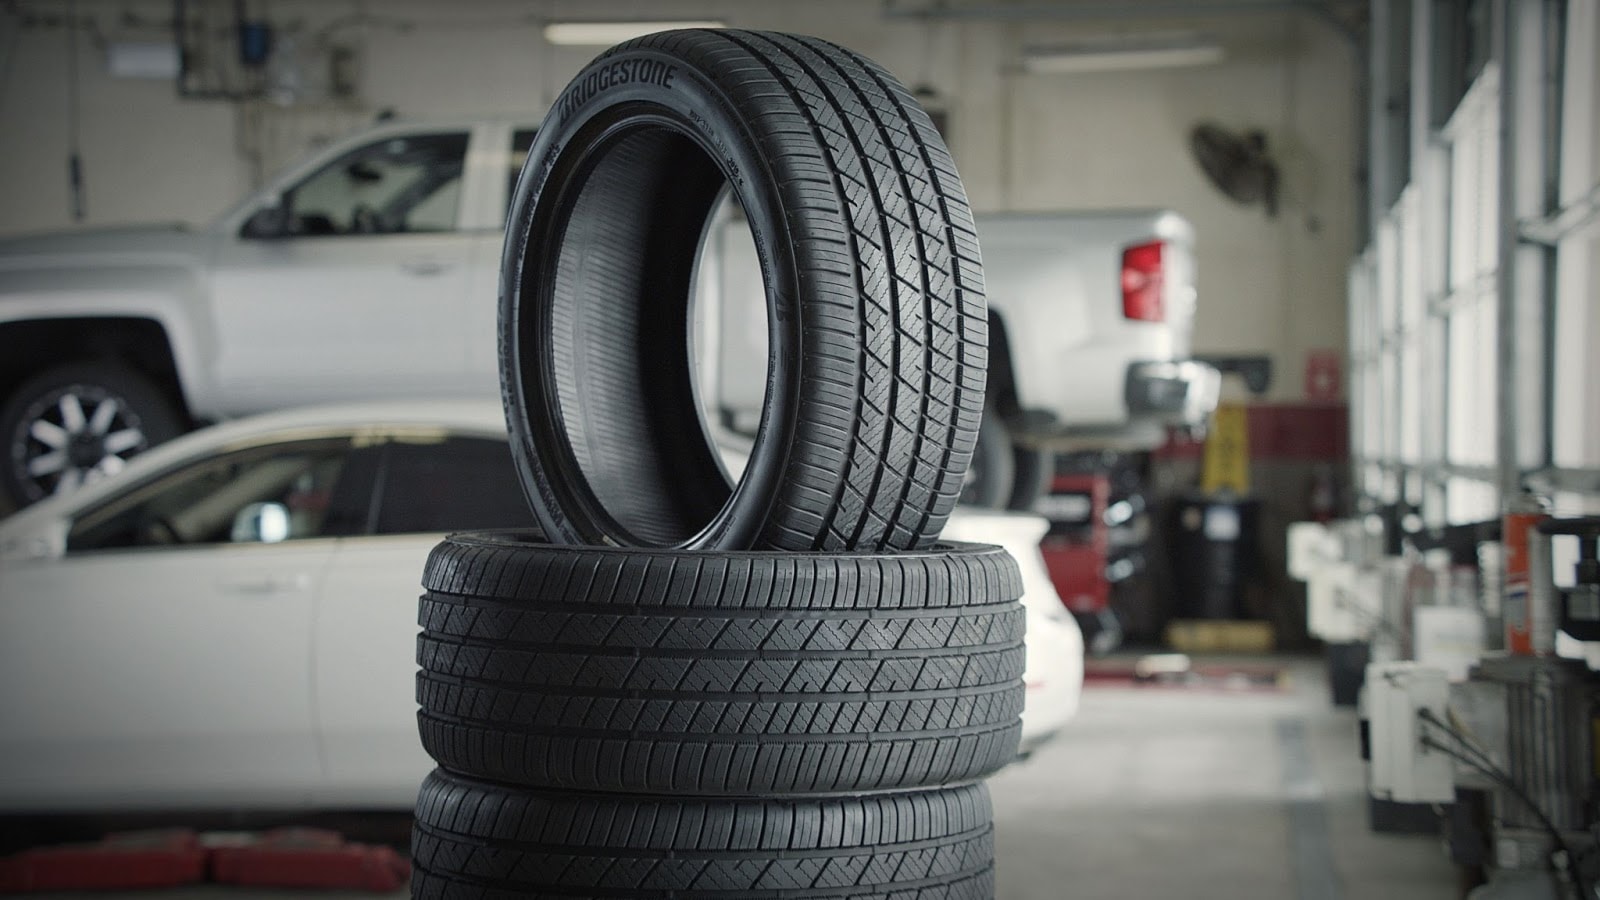 How Much Does Firestone Charge to Install Tires